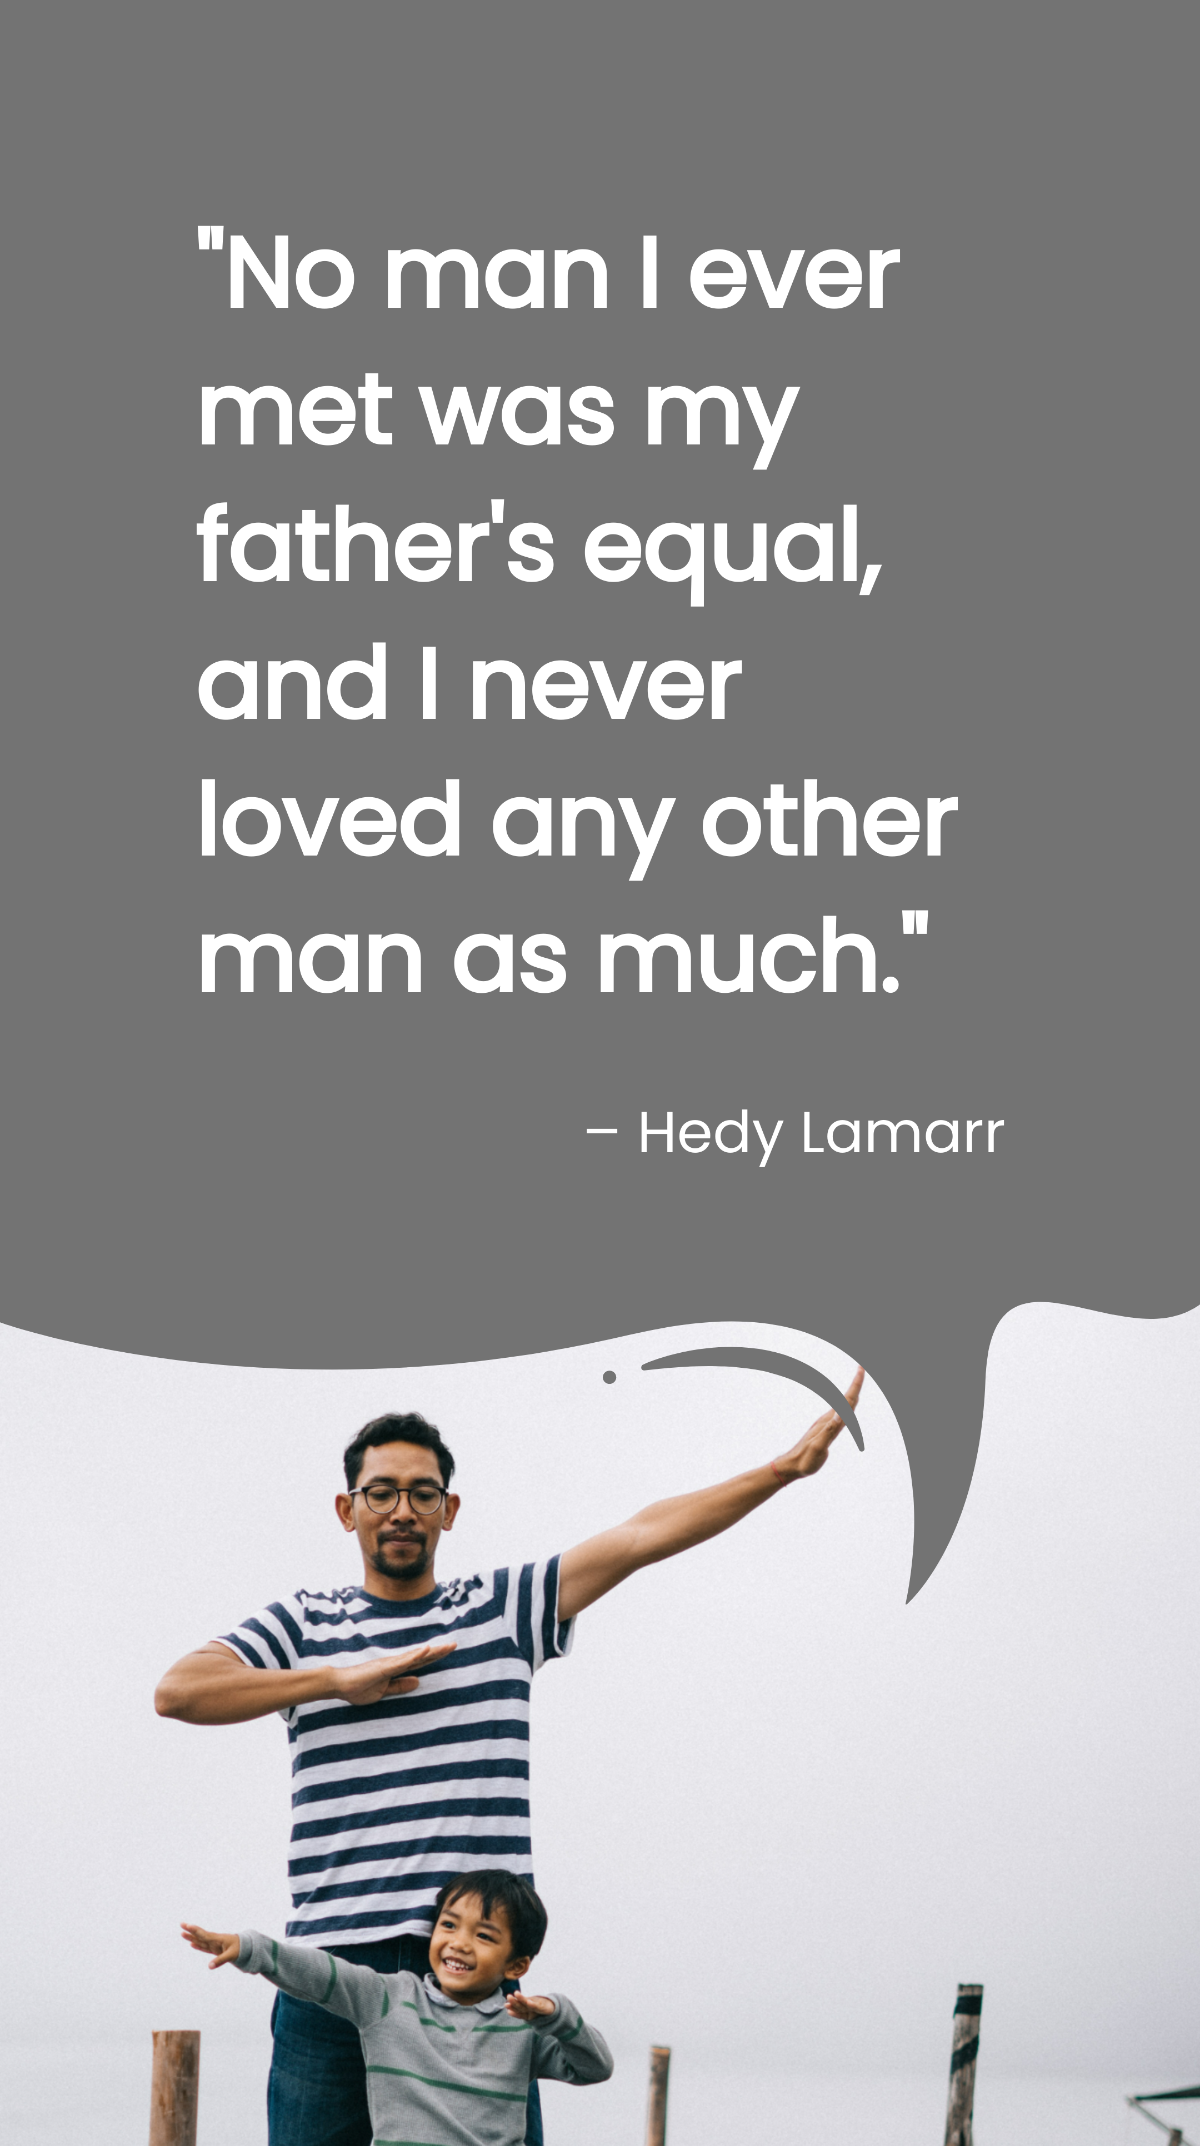 Hedy Lamarr - No man I ever met was my father's equal, and I never loved any other man as much.  Template